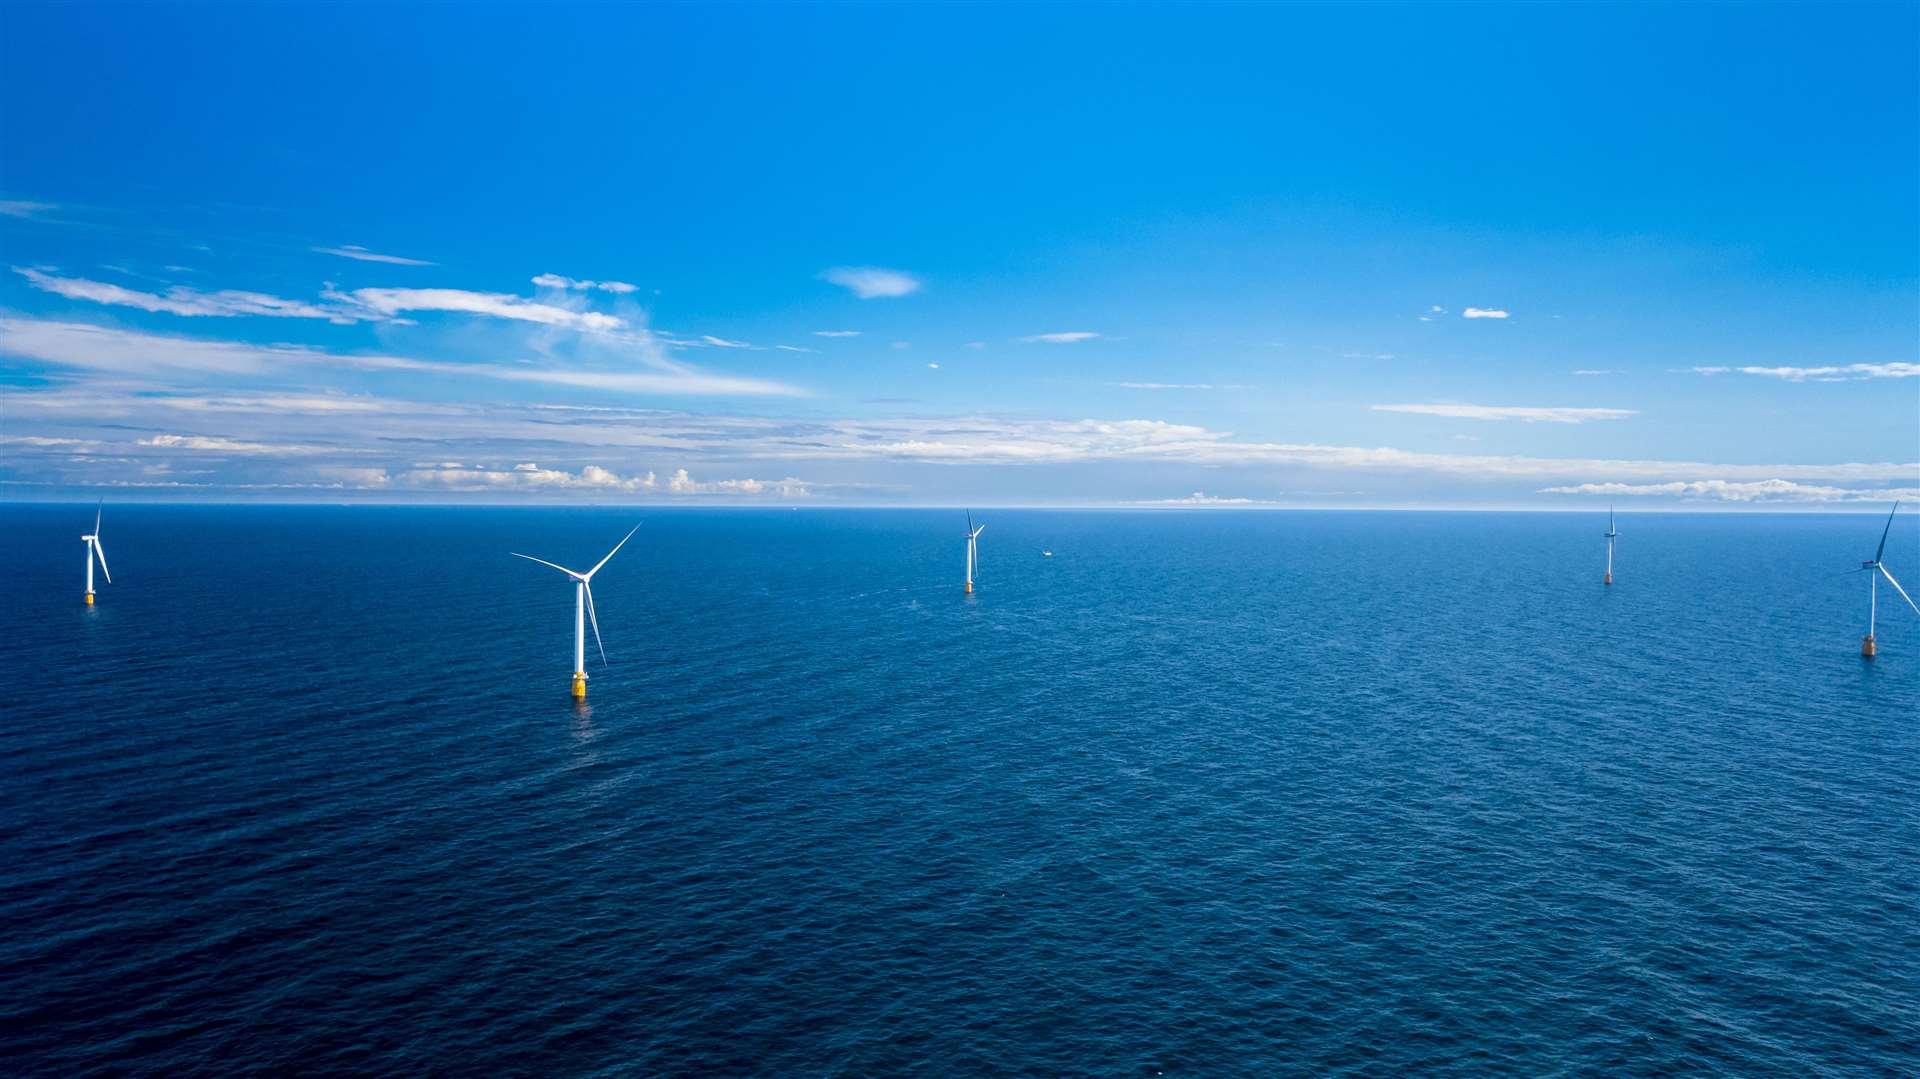 Hywind Scotland is the world's largest floating offshore wind farm, situated in waters off Peterhead.